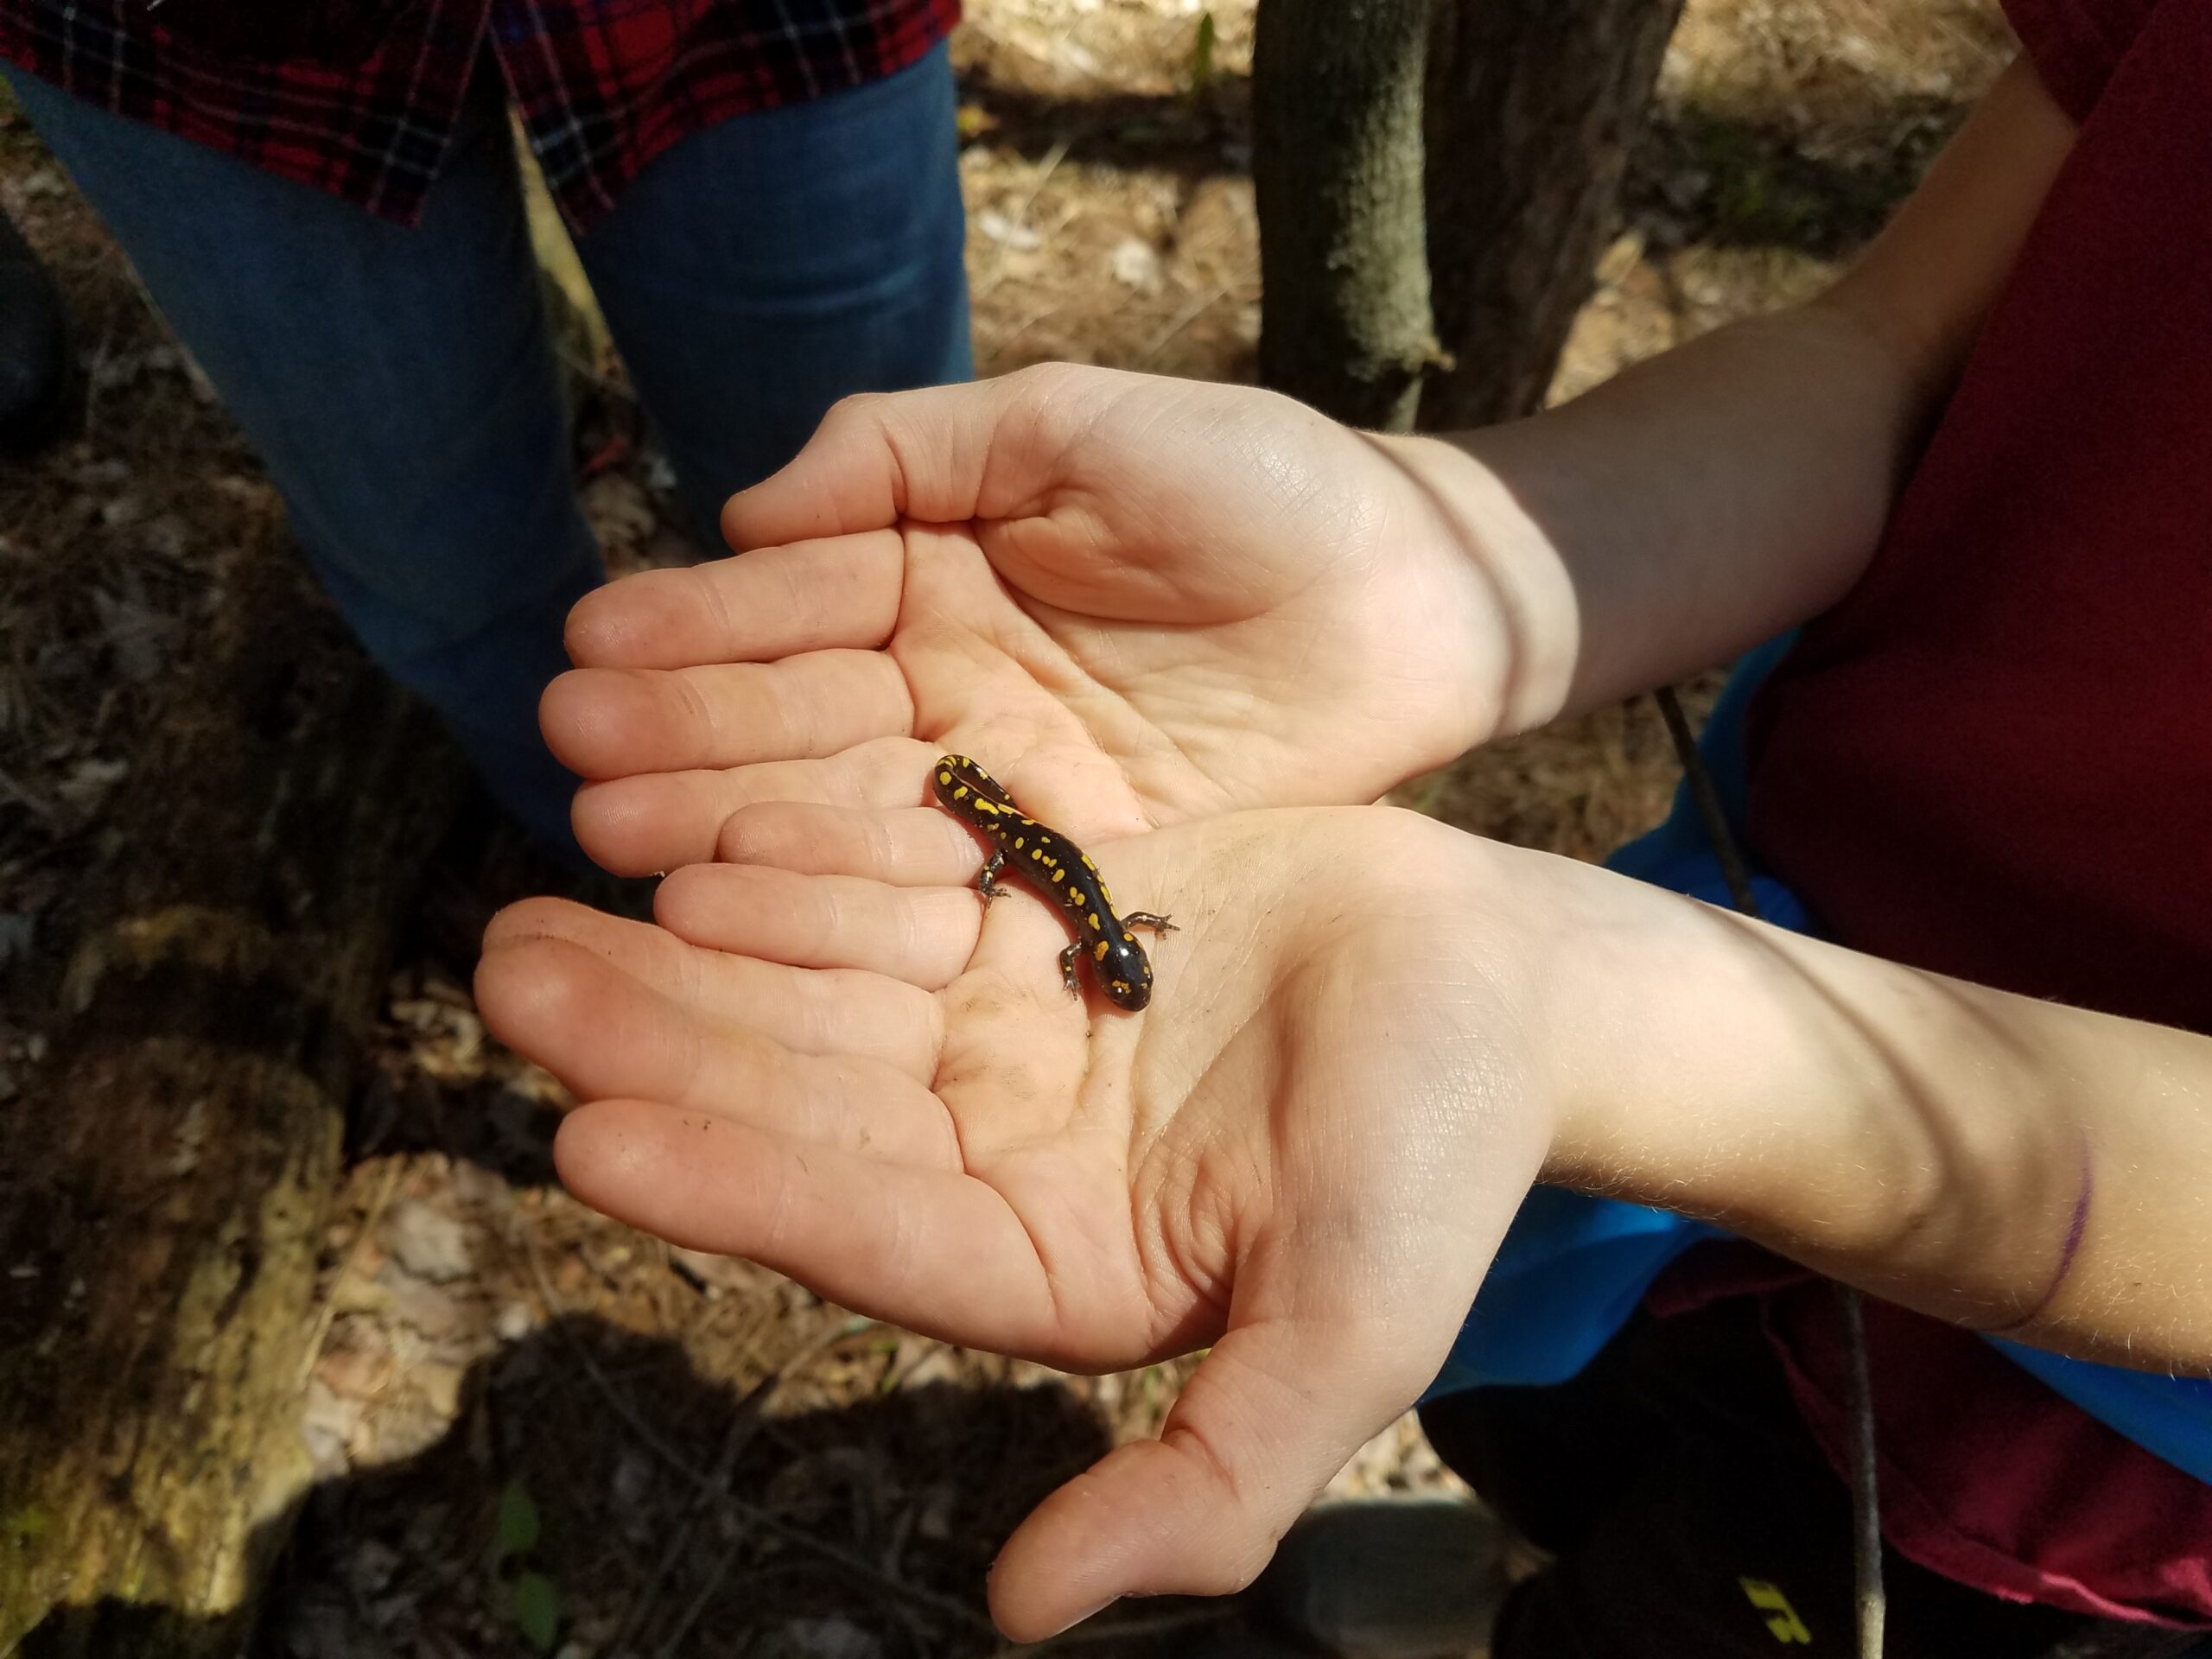 a salamander in a person's palm